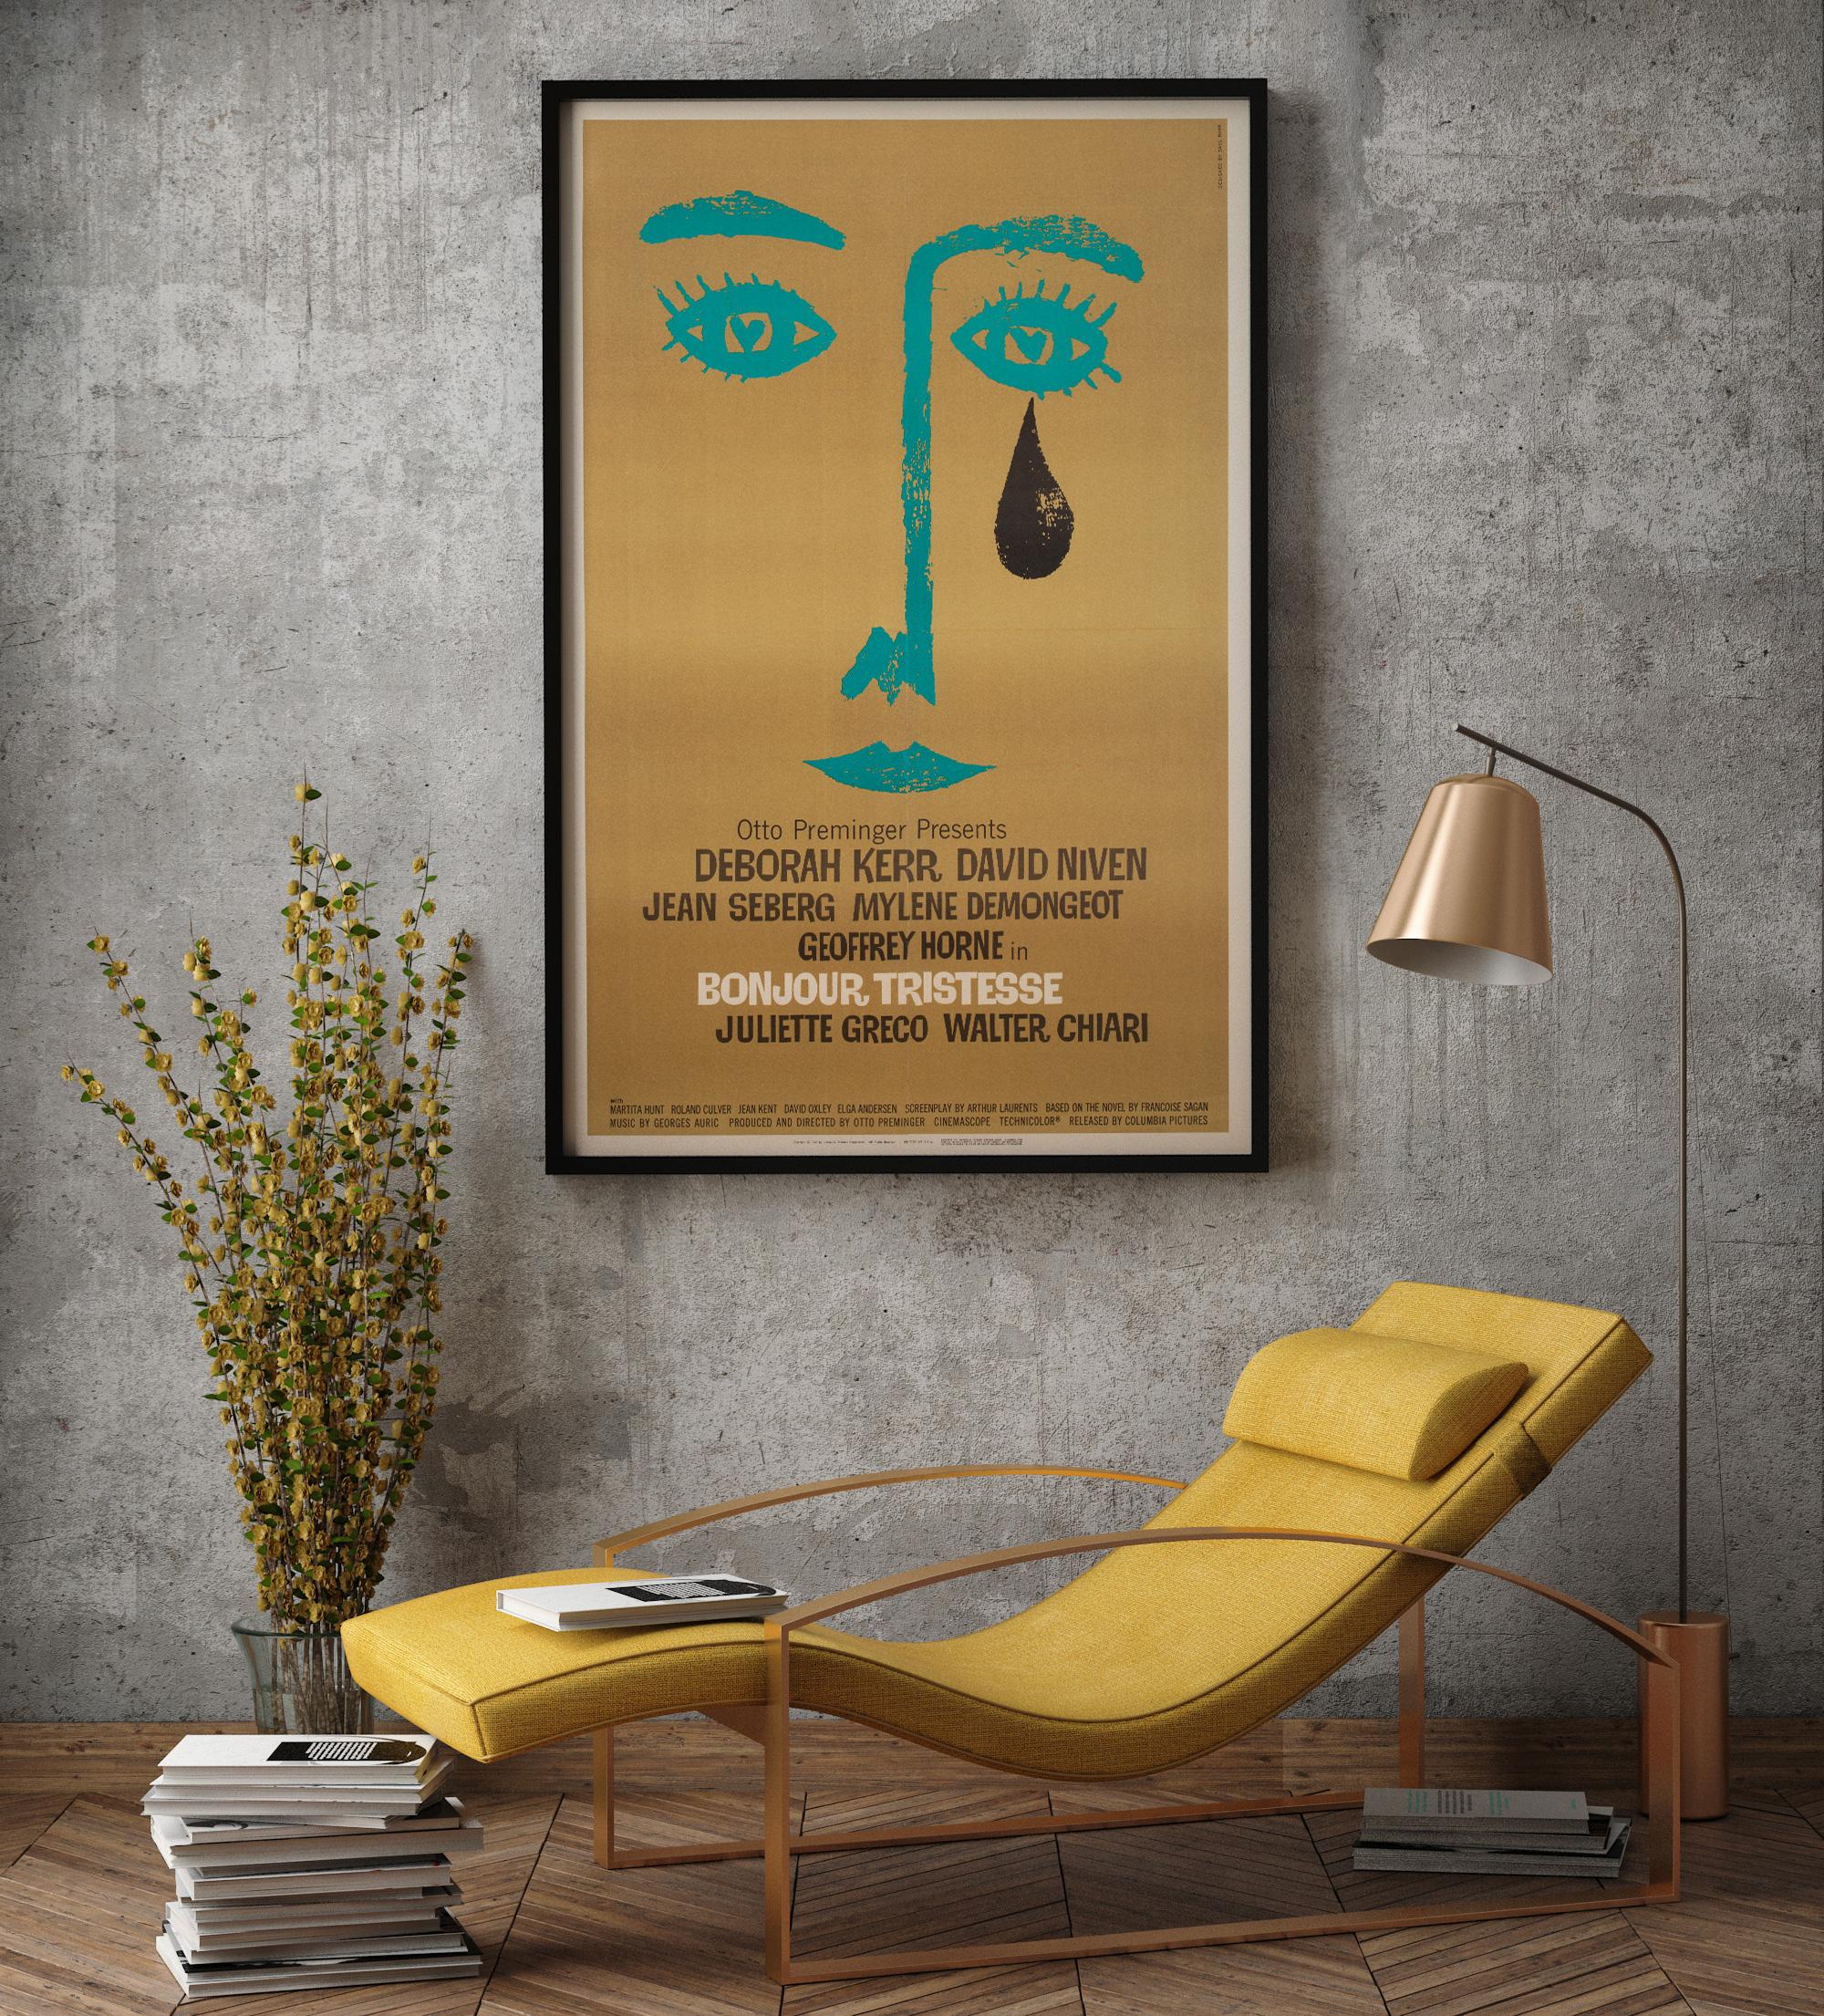 Saul Bass rarely fails to deliver and his design for Otto Preminger’s 50s Bonjour Tristesse is no exception. Simply wonderful, contemporary artwork.

Professionally cleaned, de-acidified and linen-backed. This vintage movie poster is sized 27 x 41